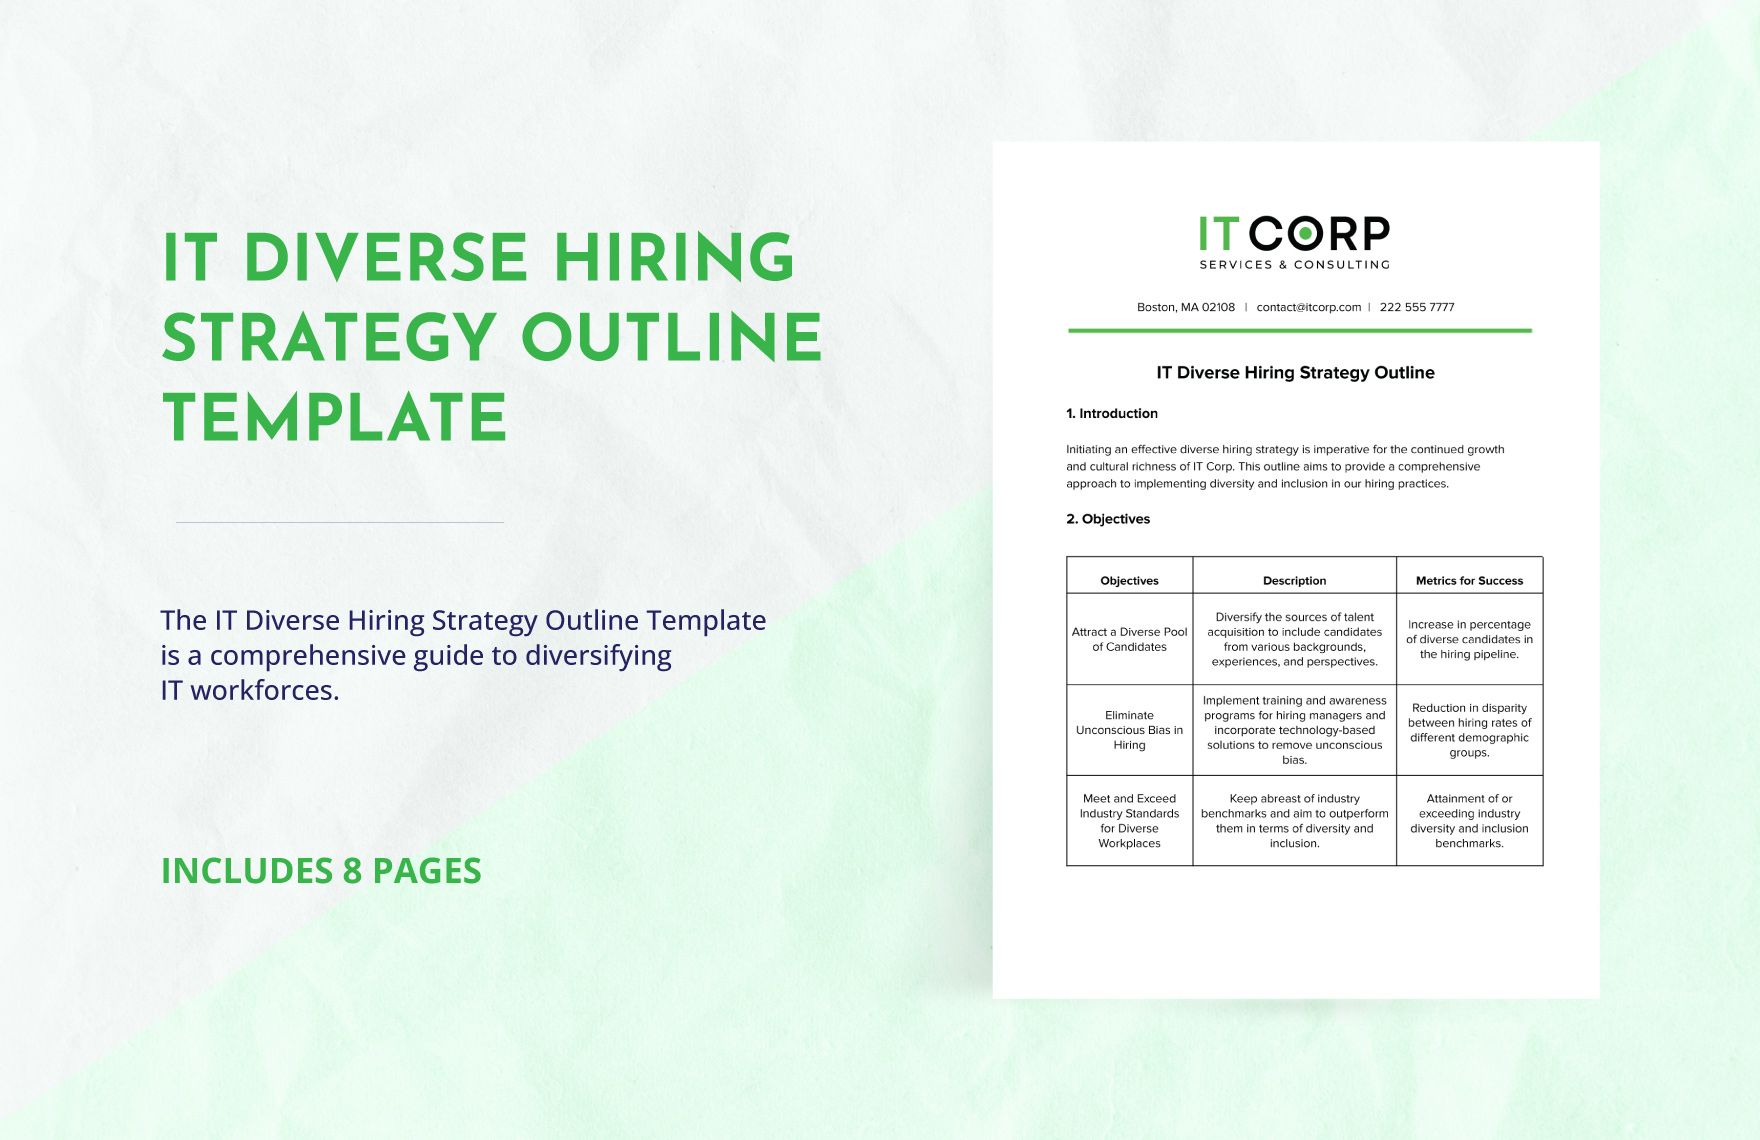 IT Diverse Hiring Strategy Outline Template in Word, Google Docs, PDF